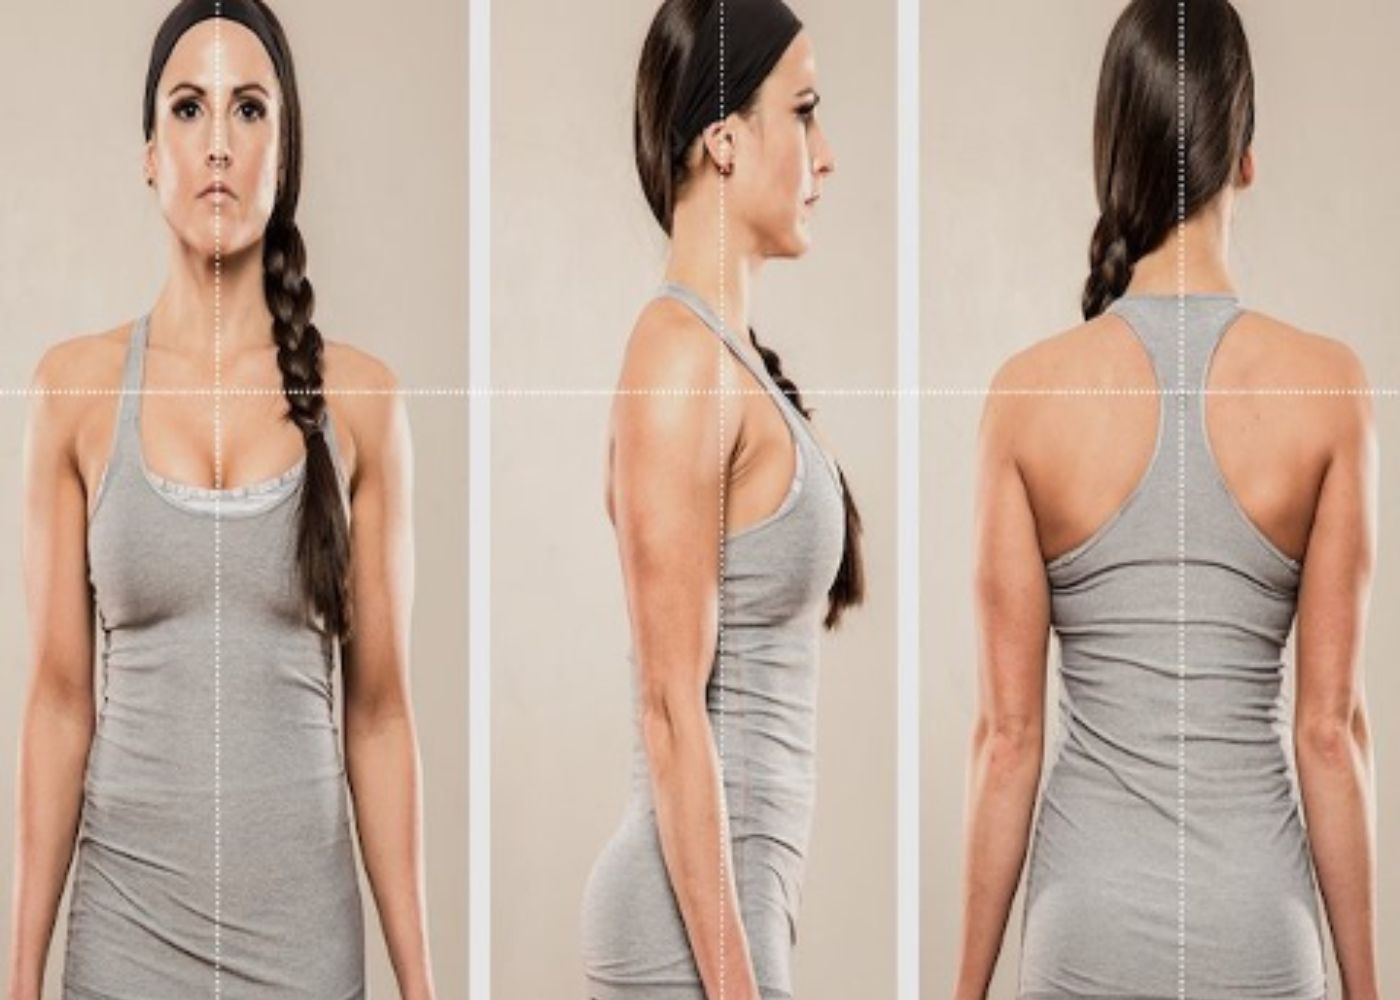 How to Focus on Proper Posture